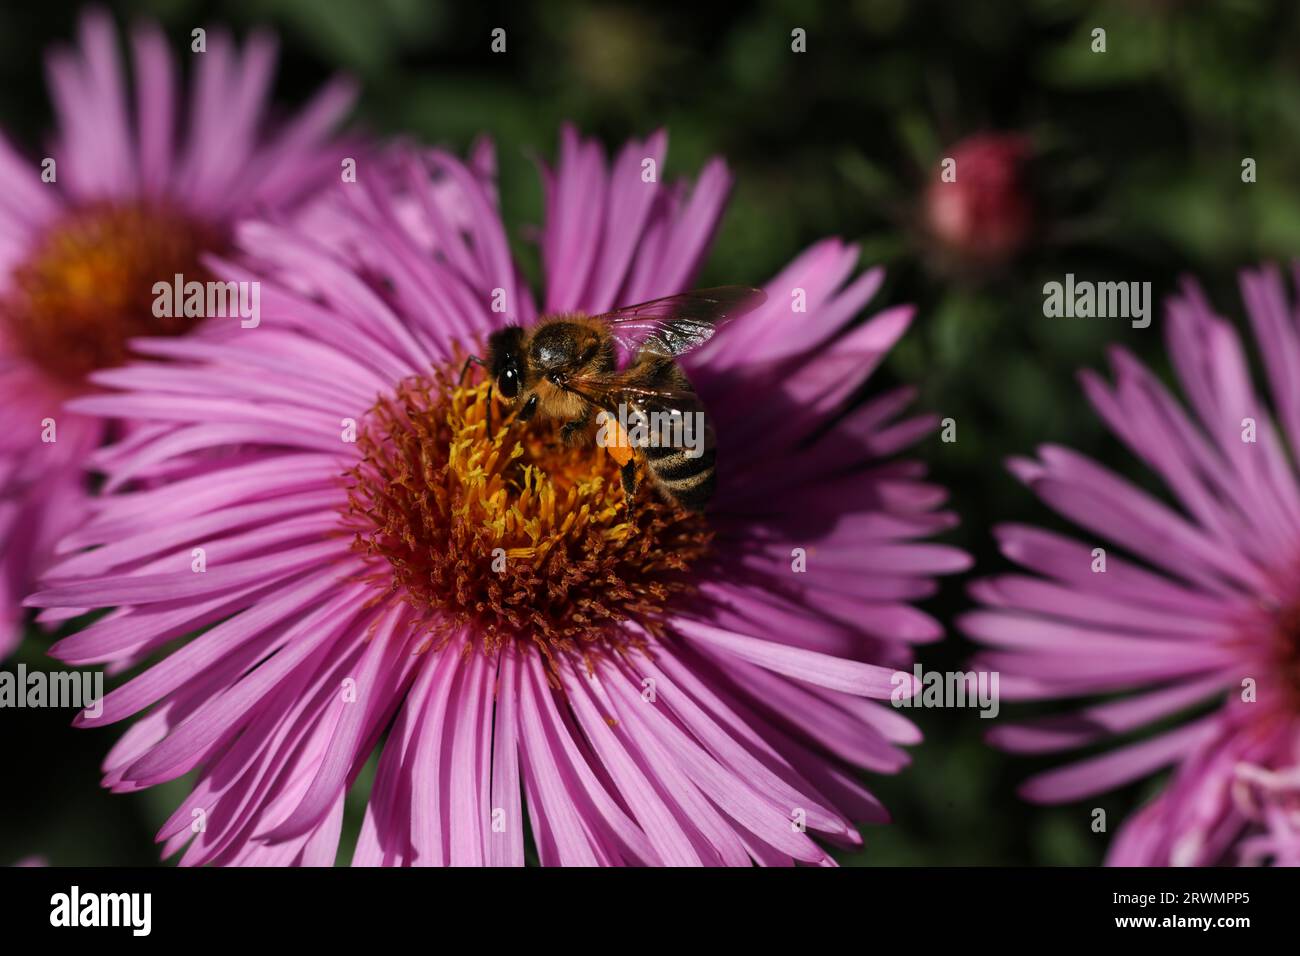 a close up of a honey bee on a pink aster flower in the garden Stock Photo